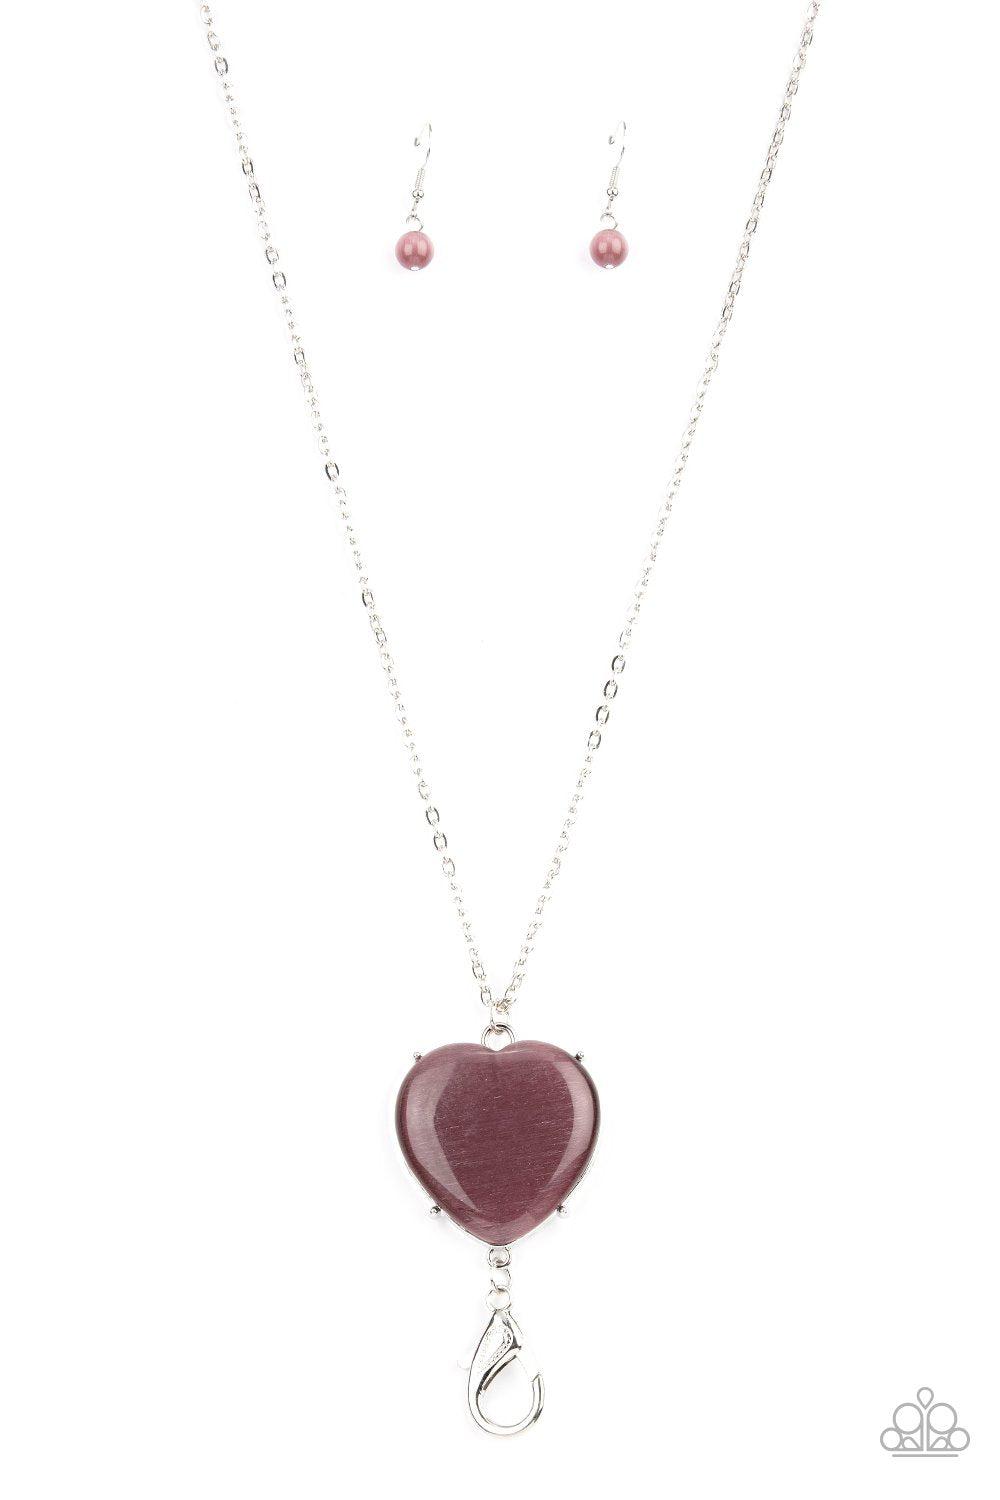 Warmhearted Glow Purple Cat&#39;s Eye Stone Heart Lanyard Necklace - Paparazzi Accessories- lightbox - CarasShop.com - $5 Jewelry by Cara Jewels